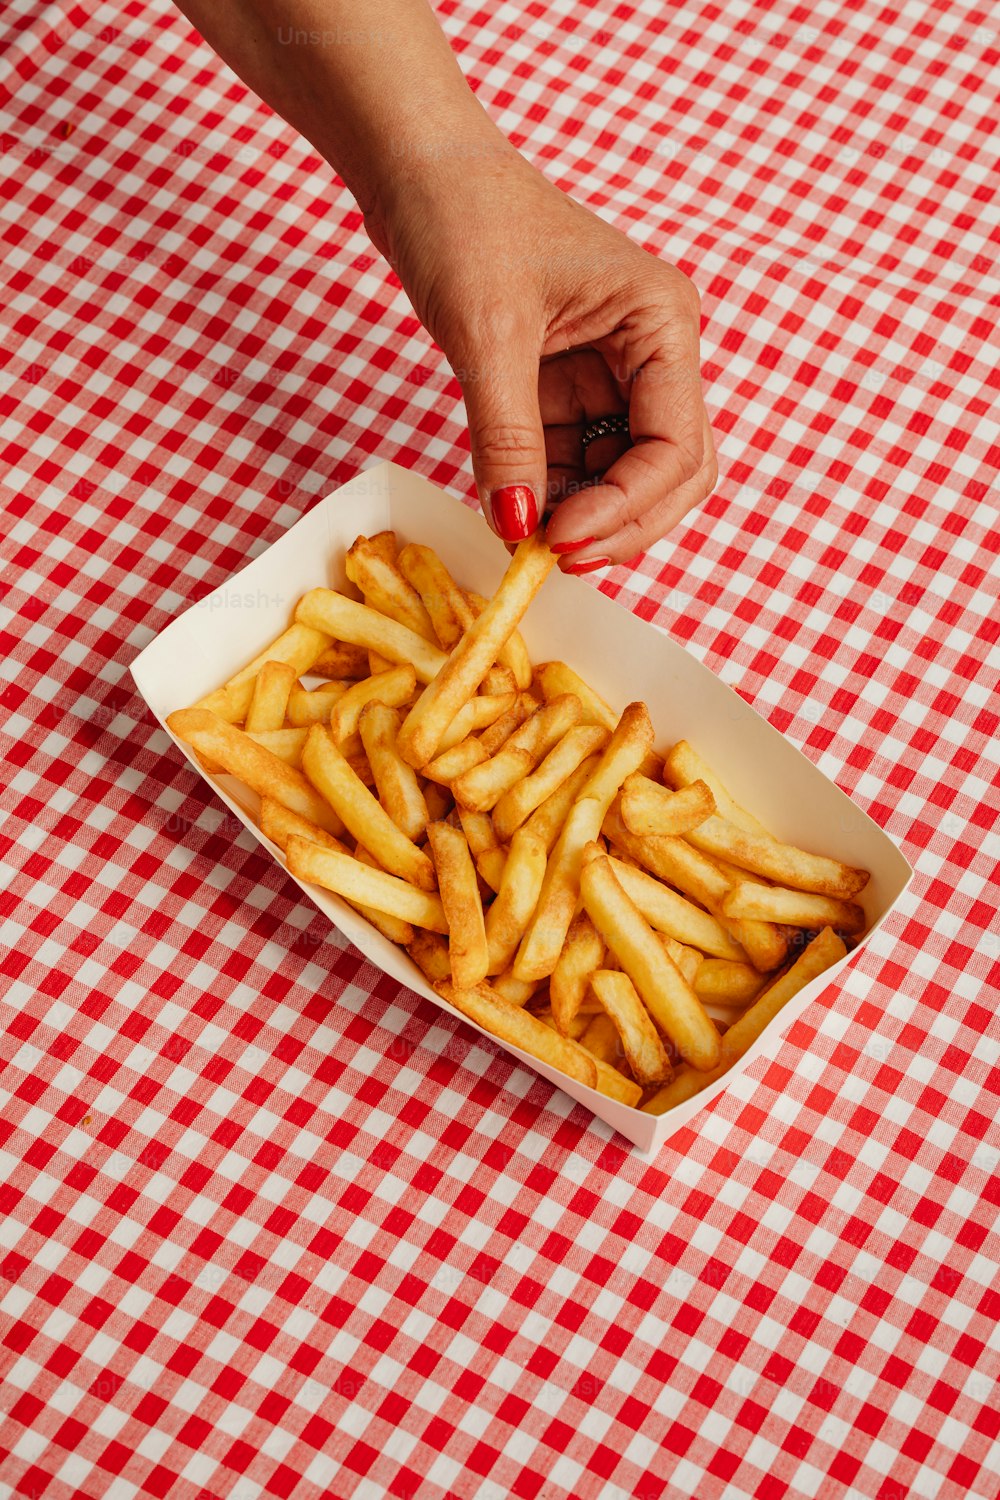 a person reaching for french fries in a box